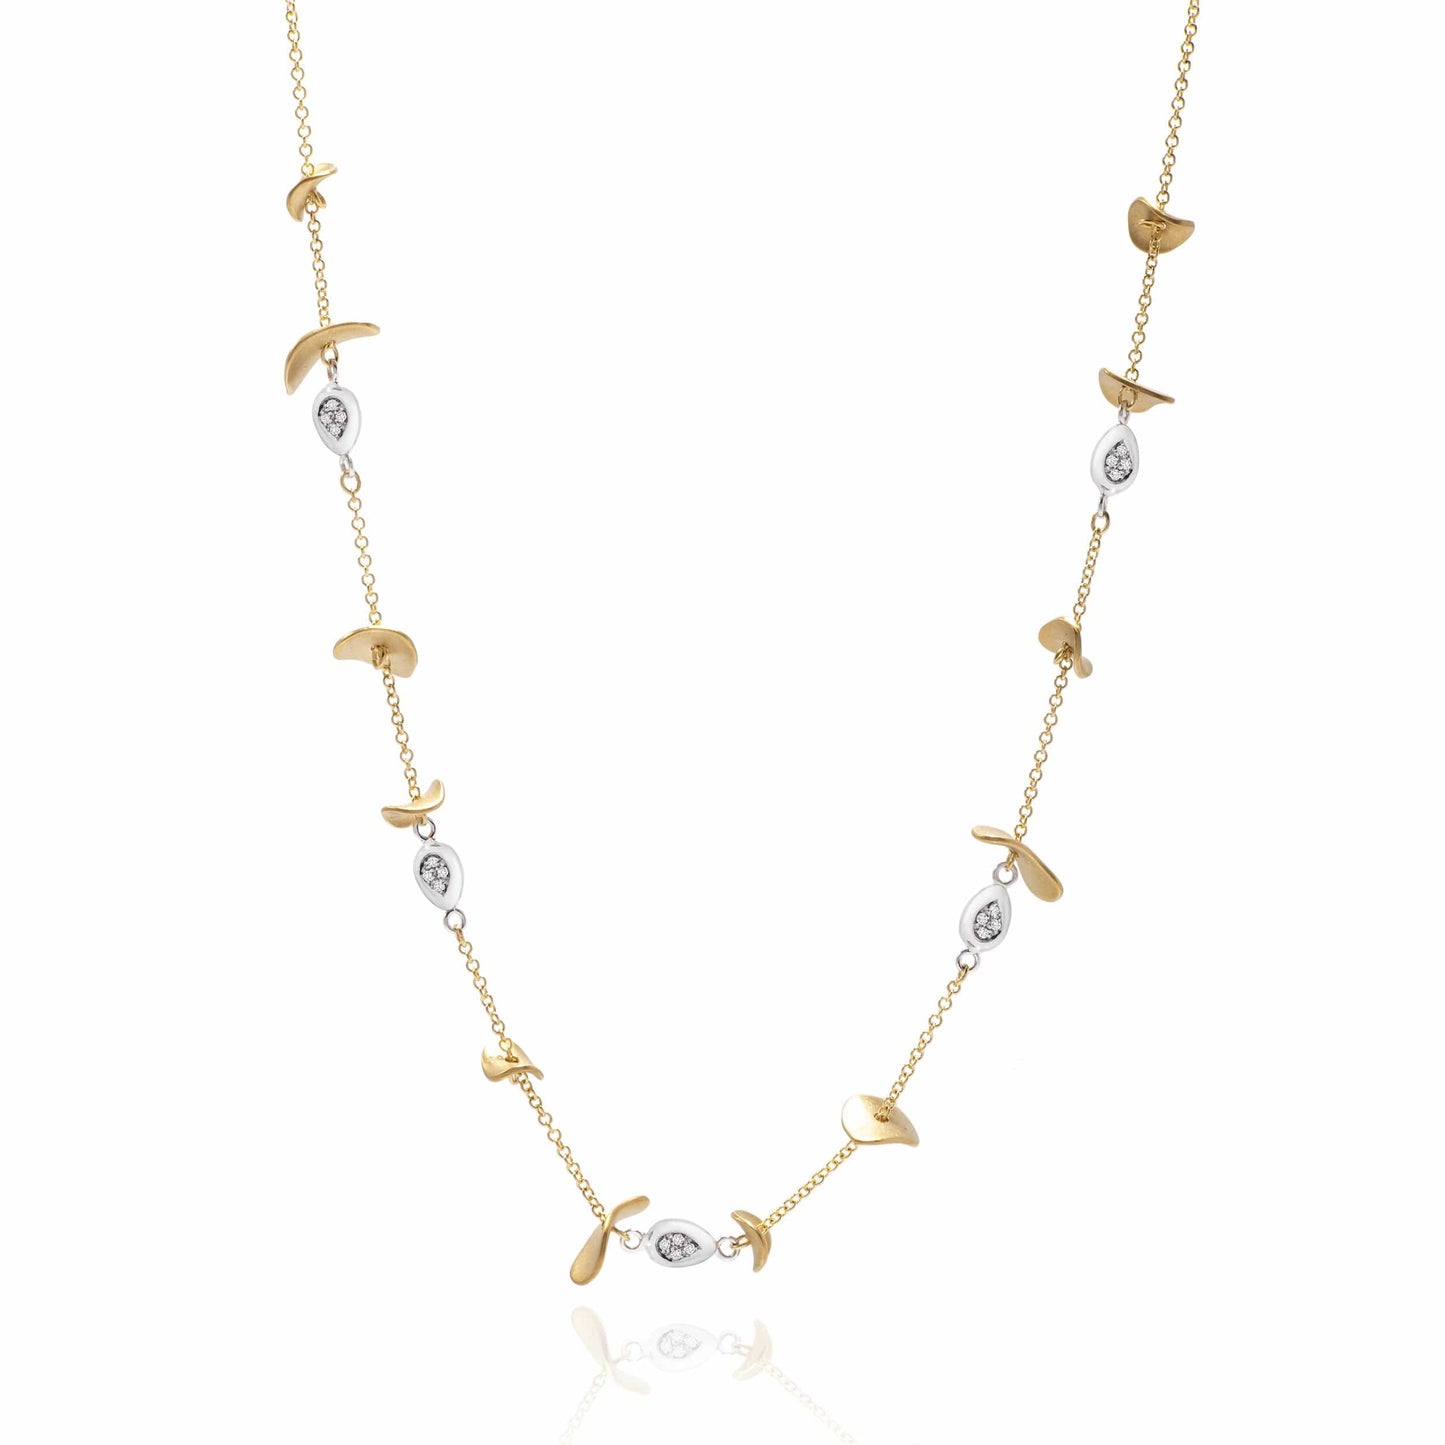 Dalia T Online Necklace Nature Collection 14KT Yellow Gold & White Diamonds Drops Necklace